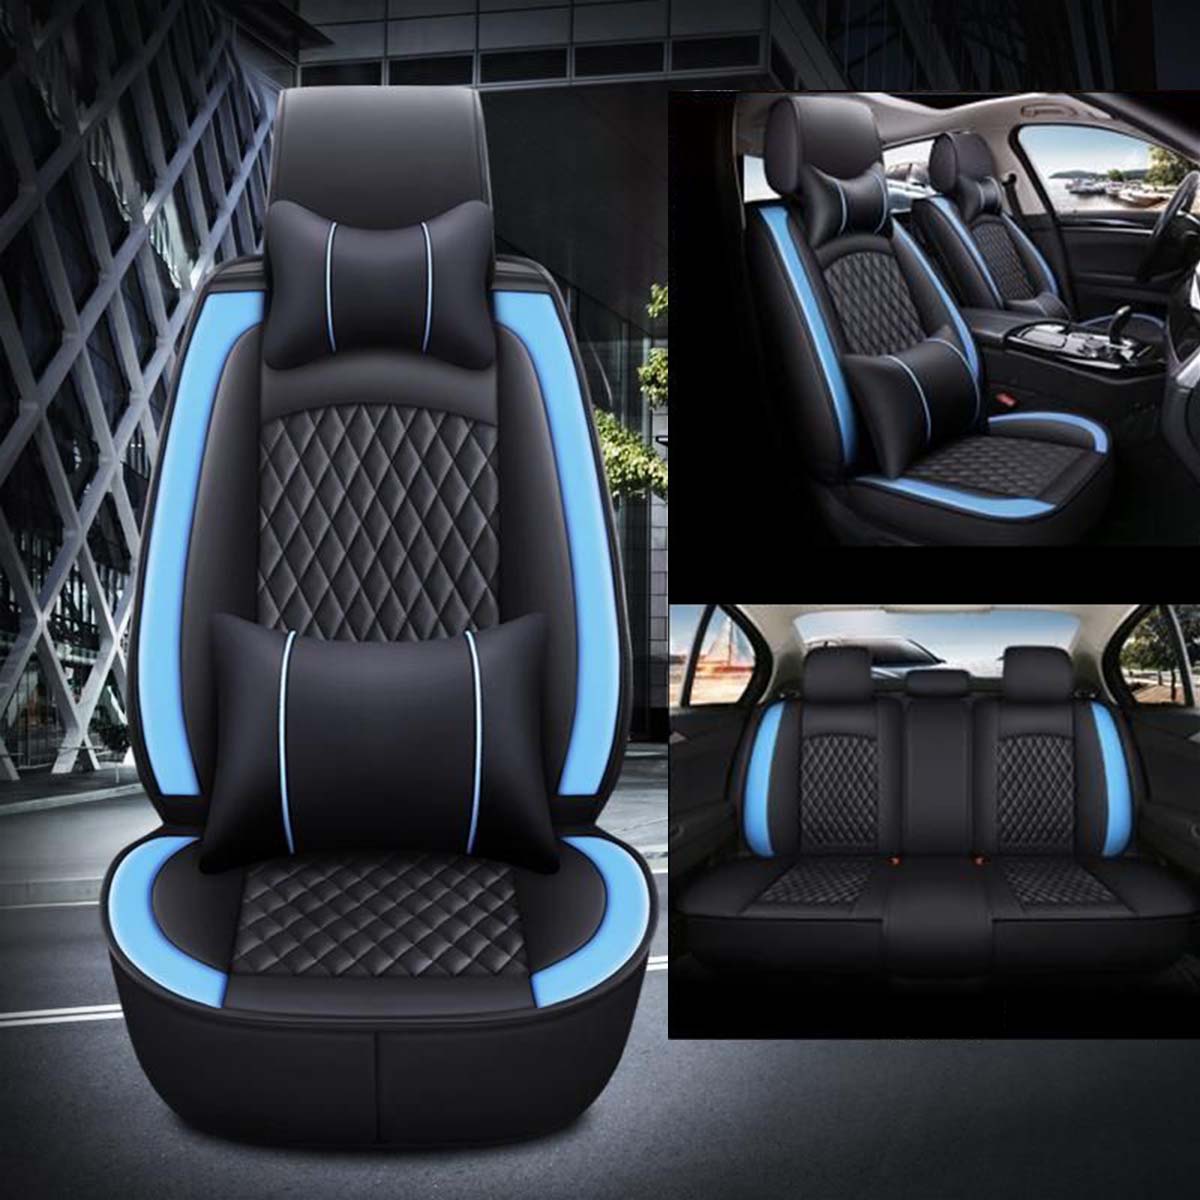 2 Car Seat Covers Full Set, Custom-Fit For Car, Waterproof Leather Front Rear Seat Automotive Protection Cushions, Car Accessories DLRL211